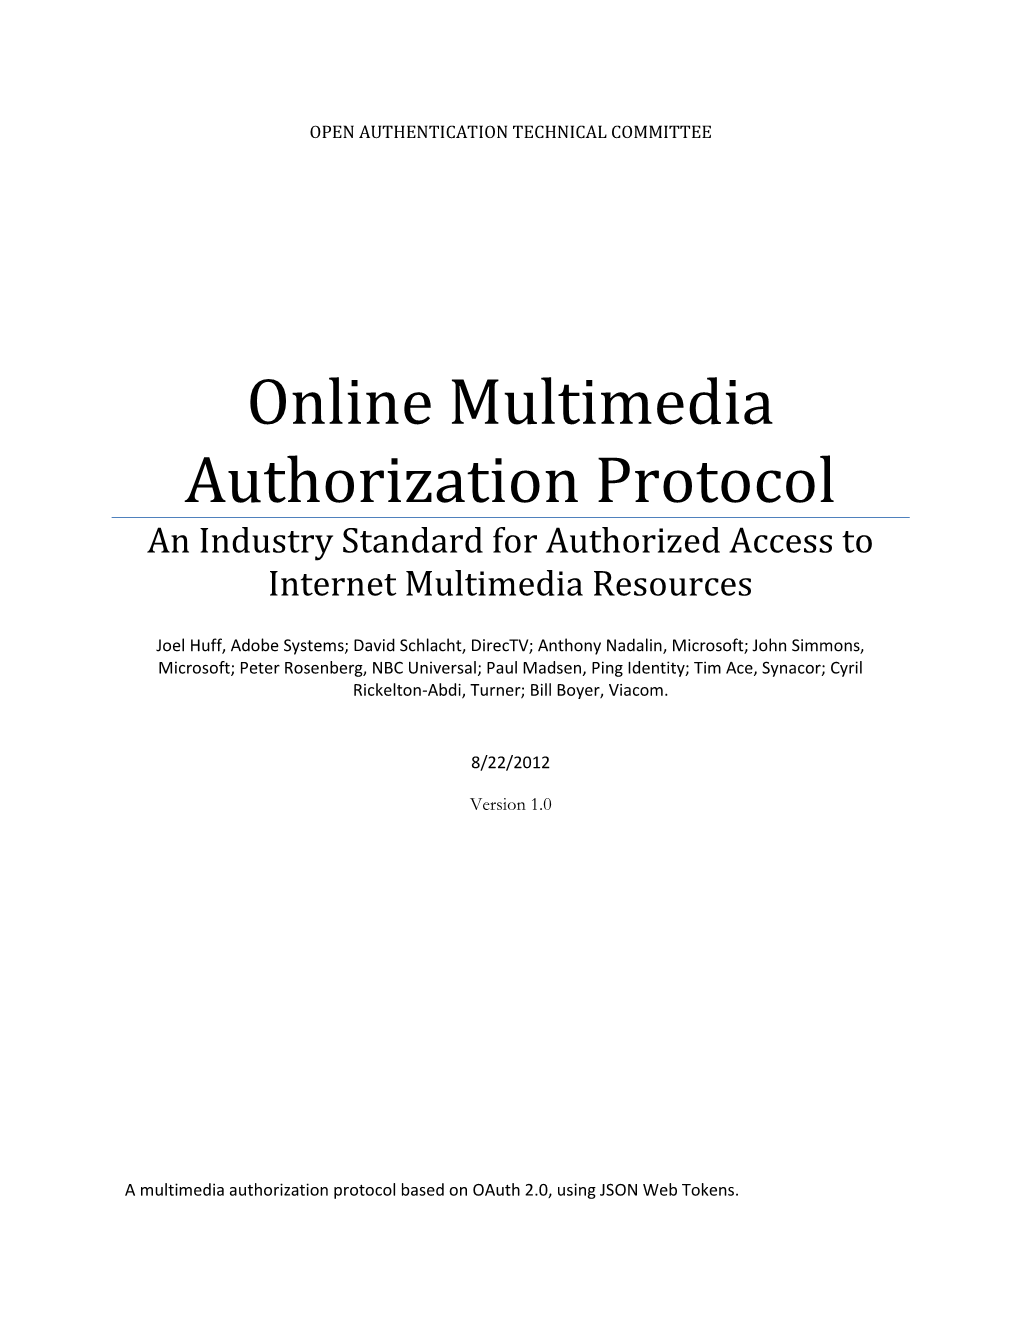 Online Multimedia Authorization Protocol an Industry Standard for Authorized Access to Internet Multimedia Resources